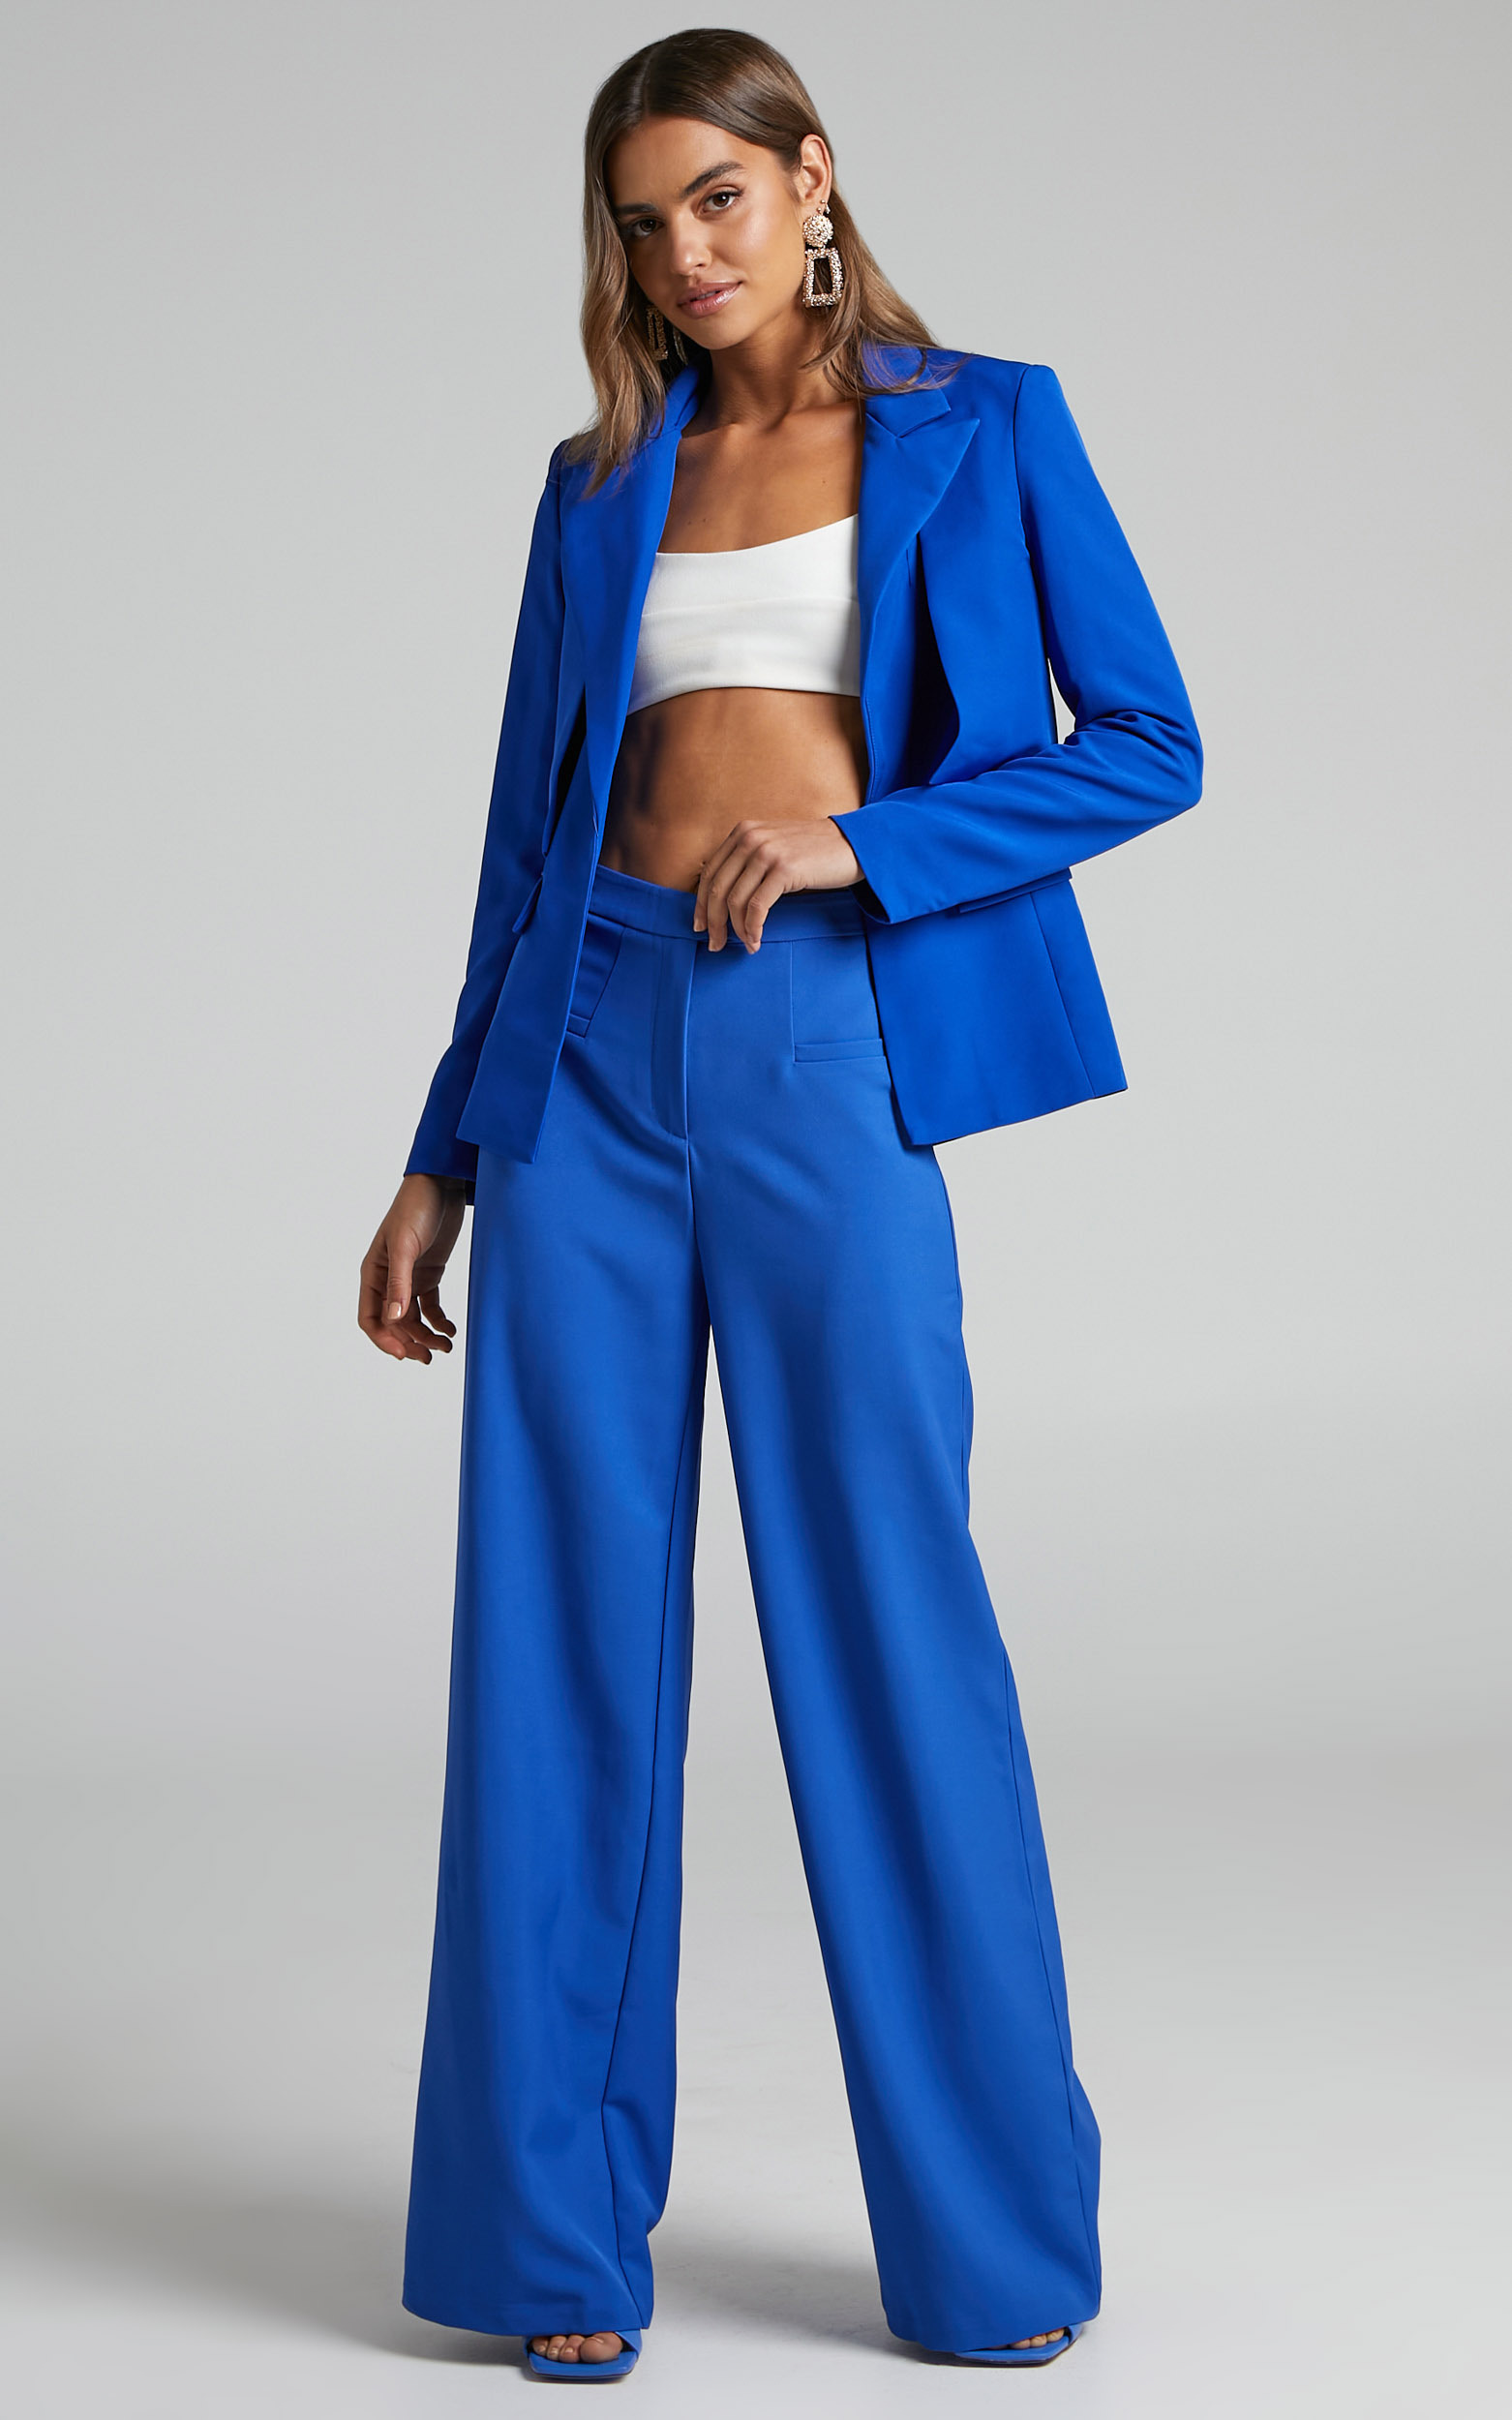 Jaxine Tailored Wide Leg Trousers in Cobalt - 04, BLU1, hi-res image number null